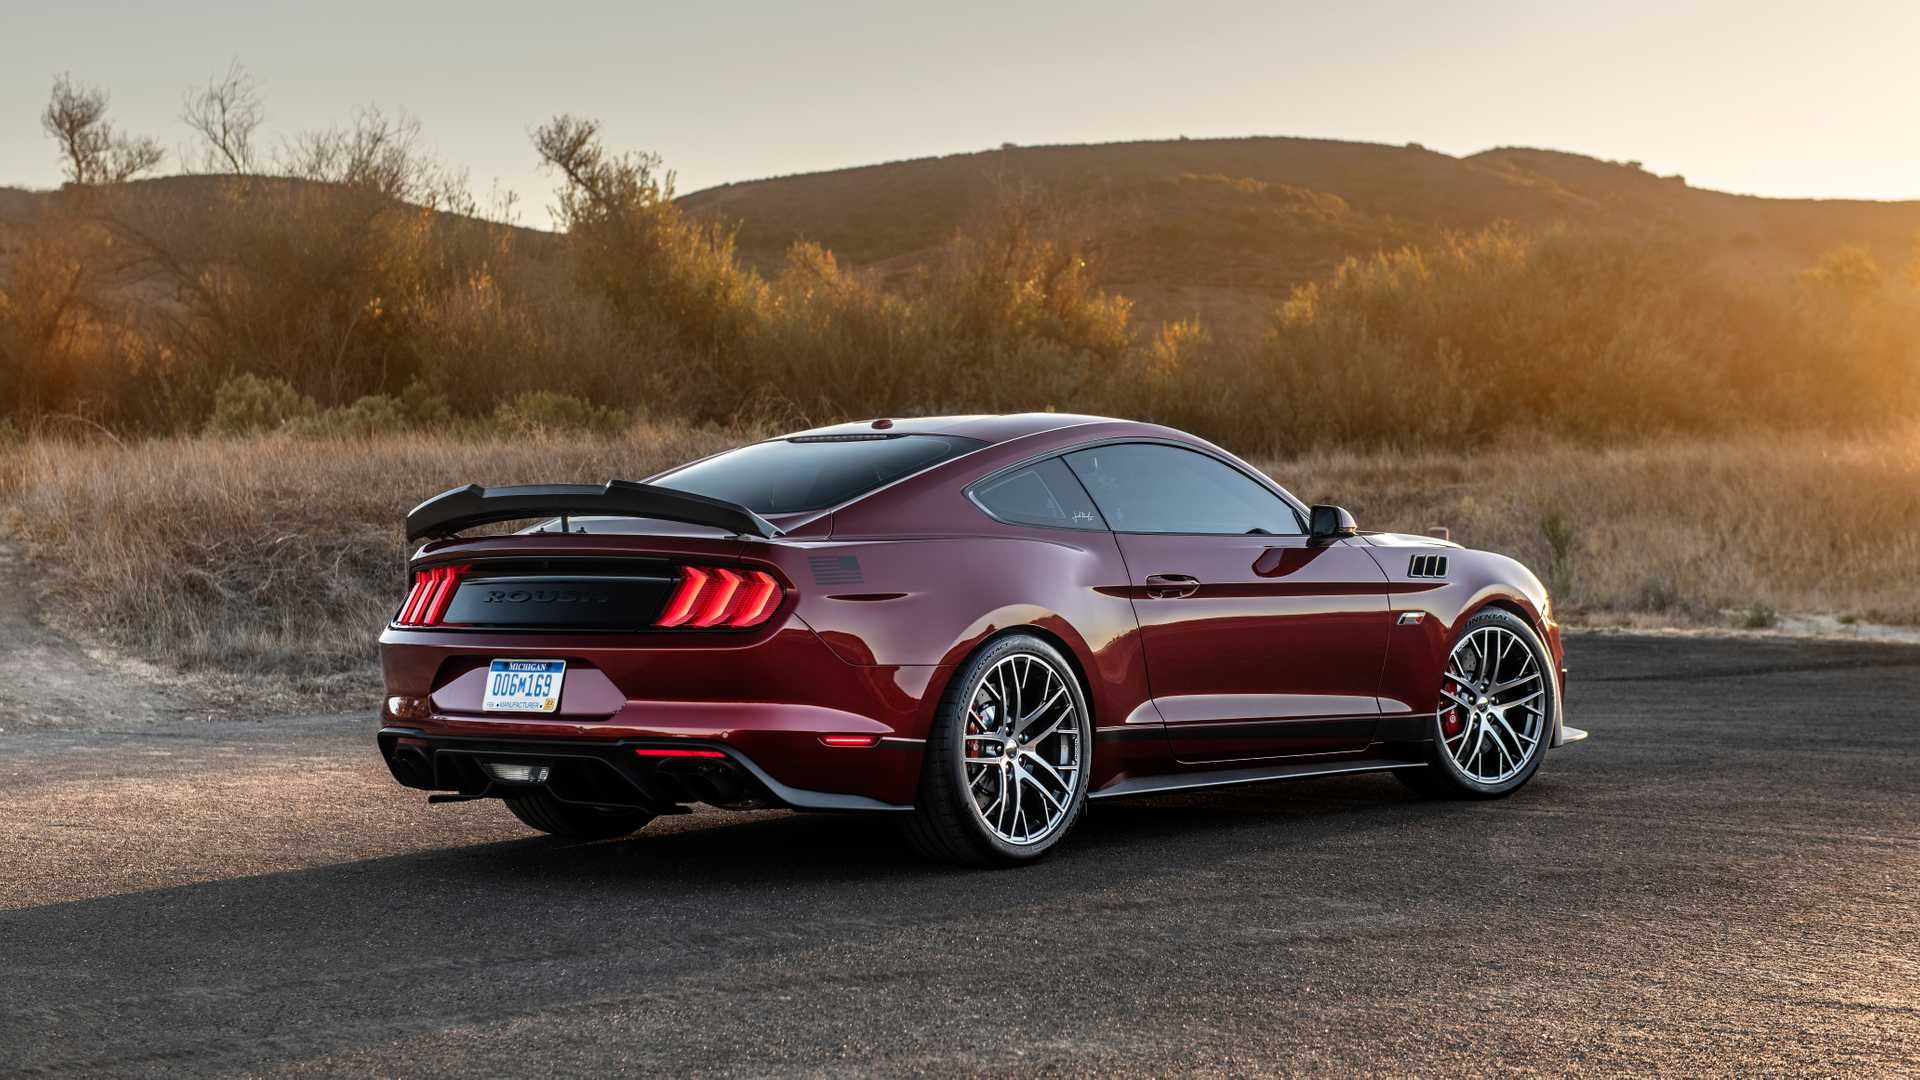 2020 Ford Mustang Jack Roush Edition by Roush Performance